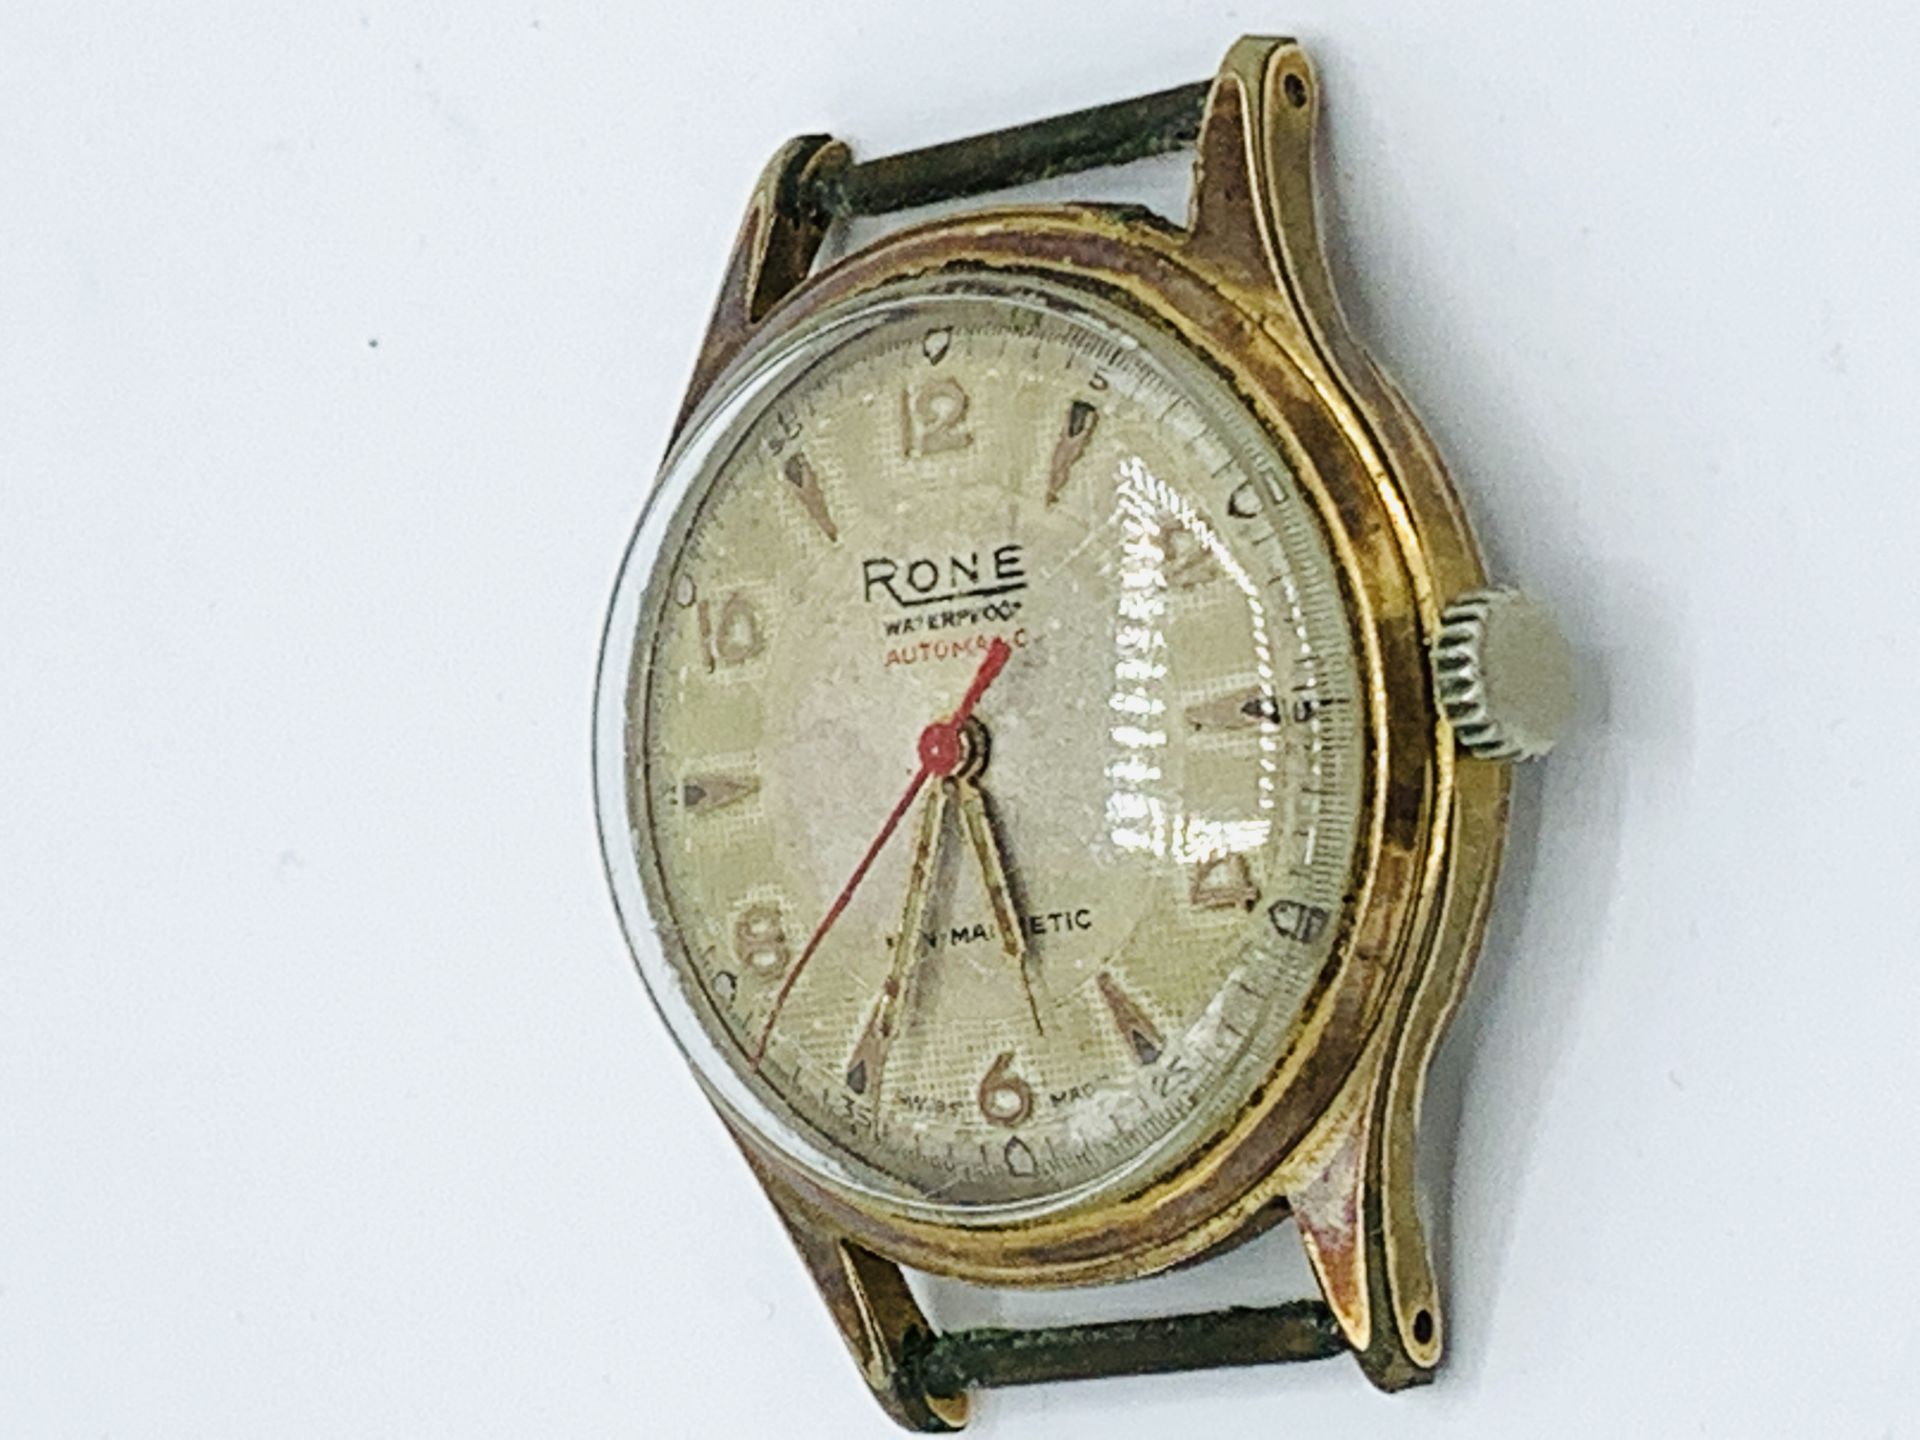 14k gold case pocket watch; an 18k gold case pocket watch, marked J. Summer, and a wrist watch - Image 5 of 7